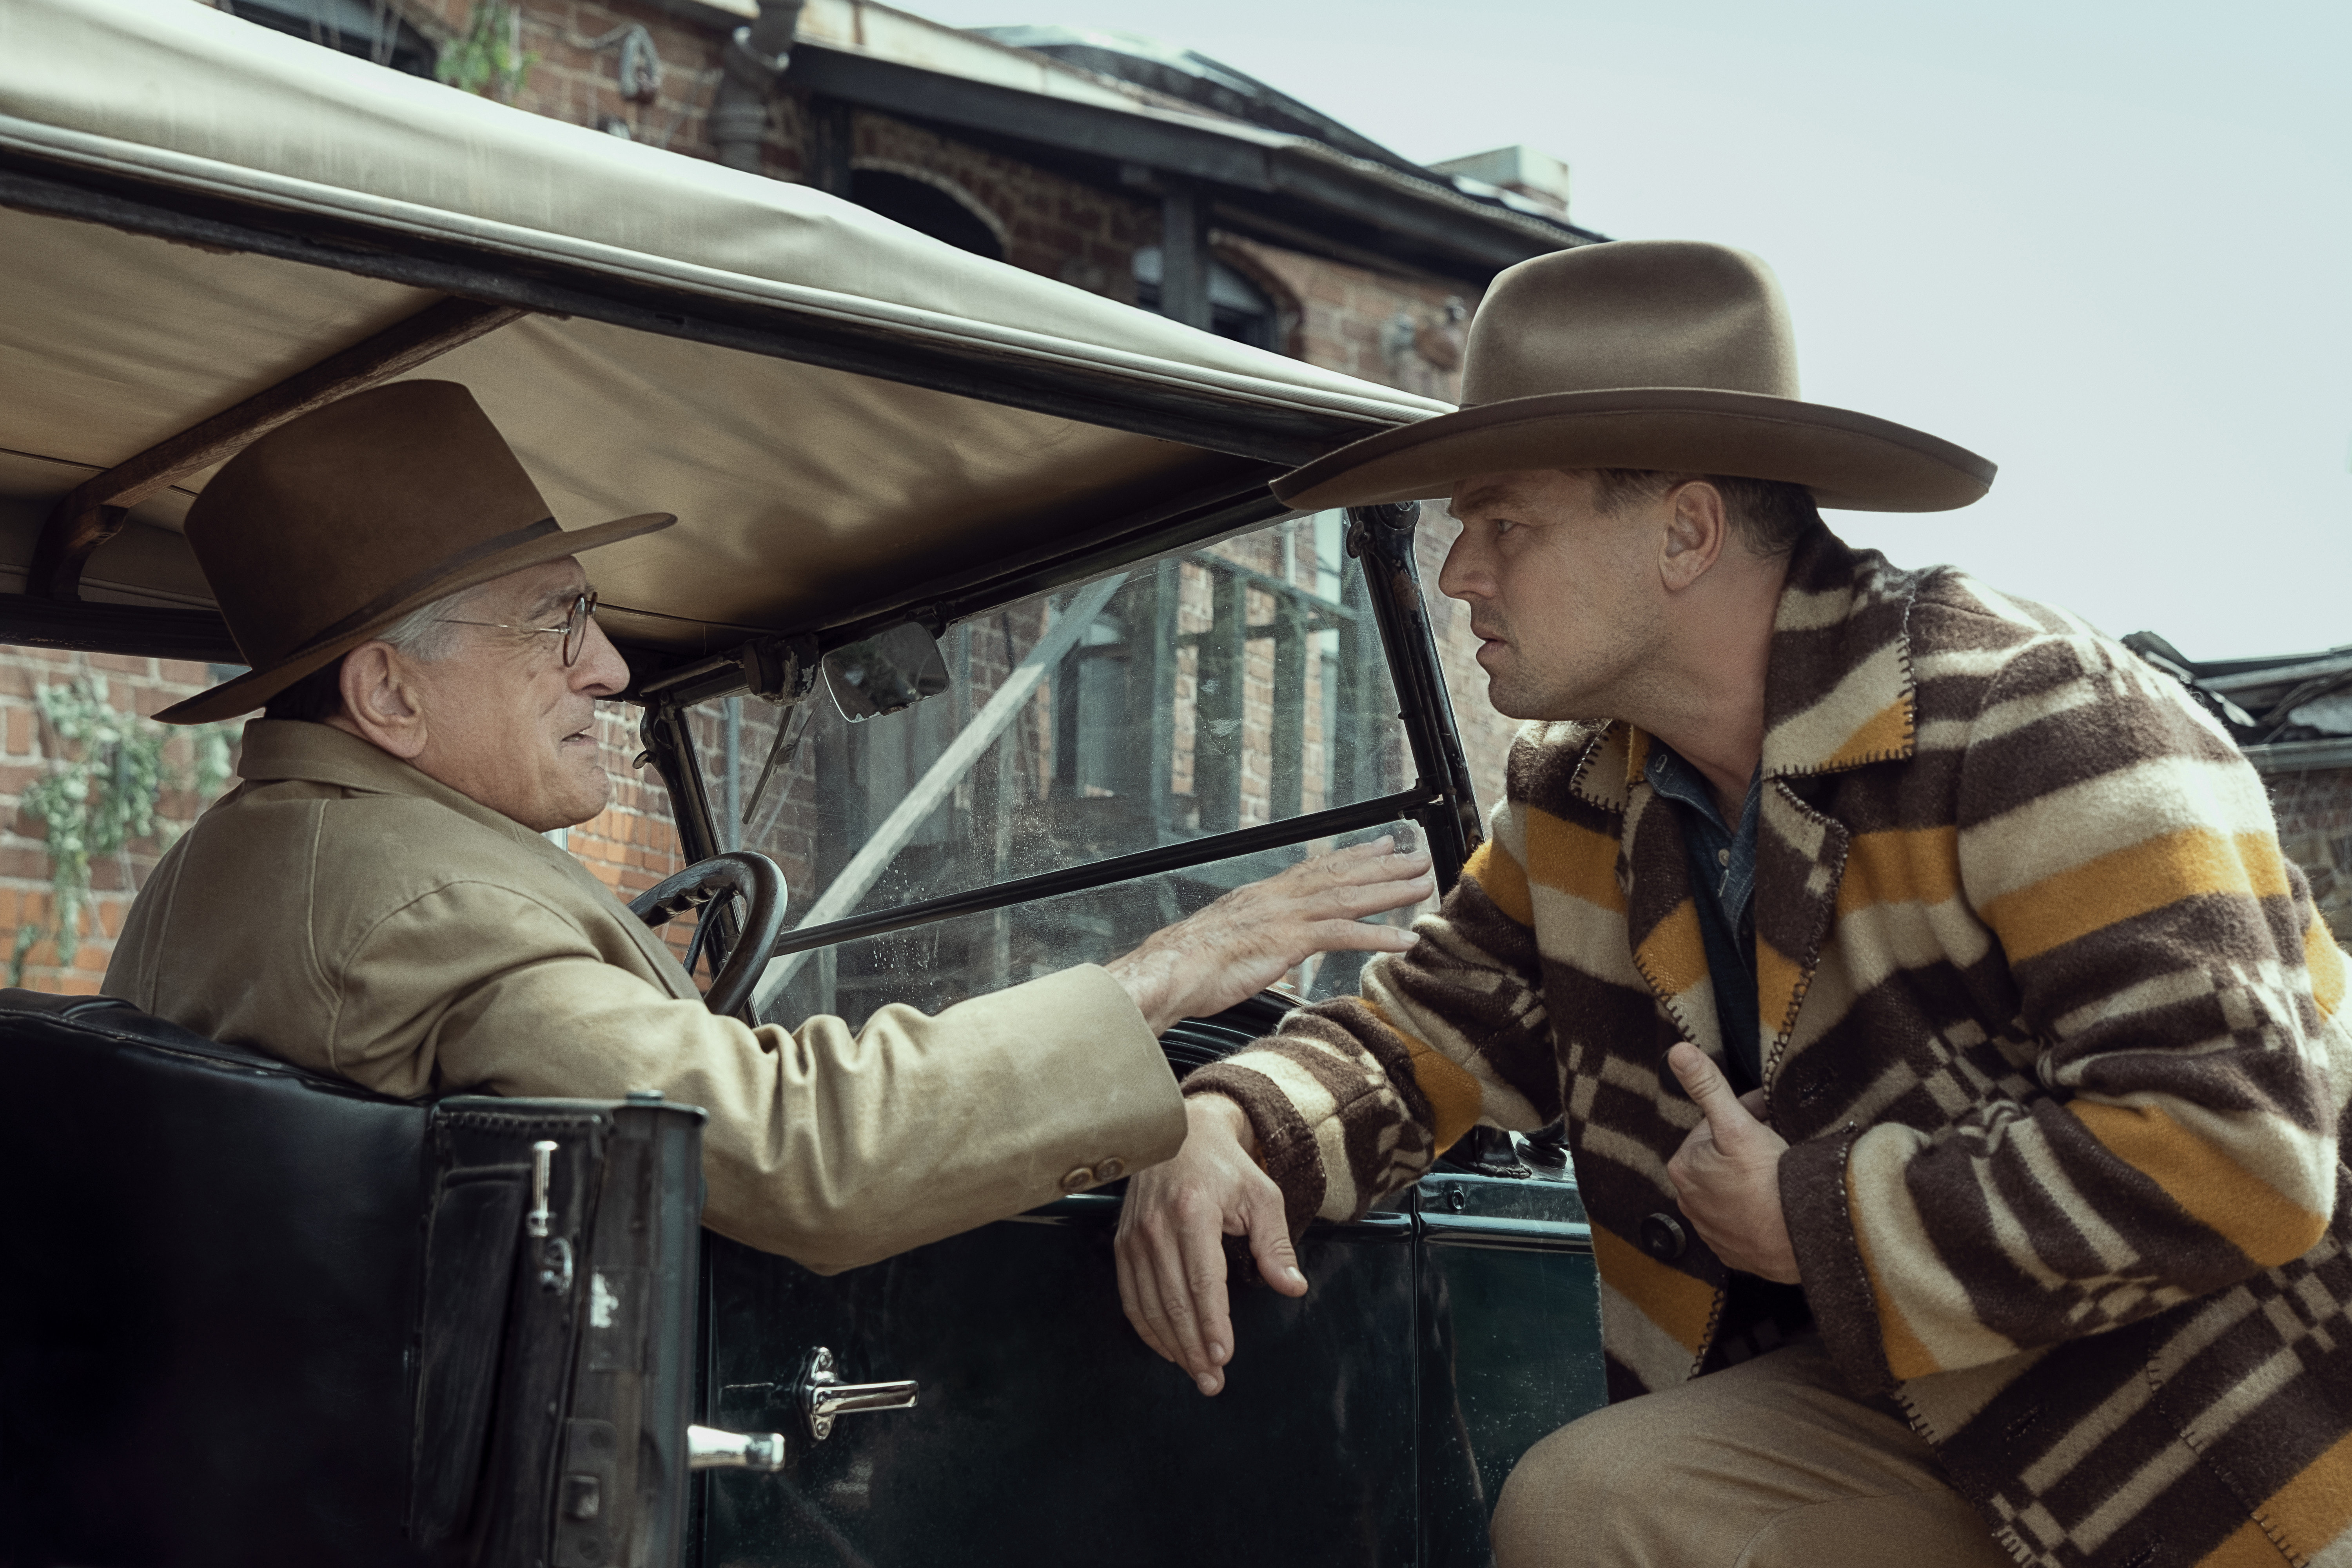 Leonardo DiCaprio in a cowboy hat and poncho leans over an automobile driven by Robert DeNiro in Killers of the Flower Moon.